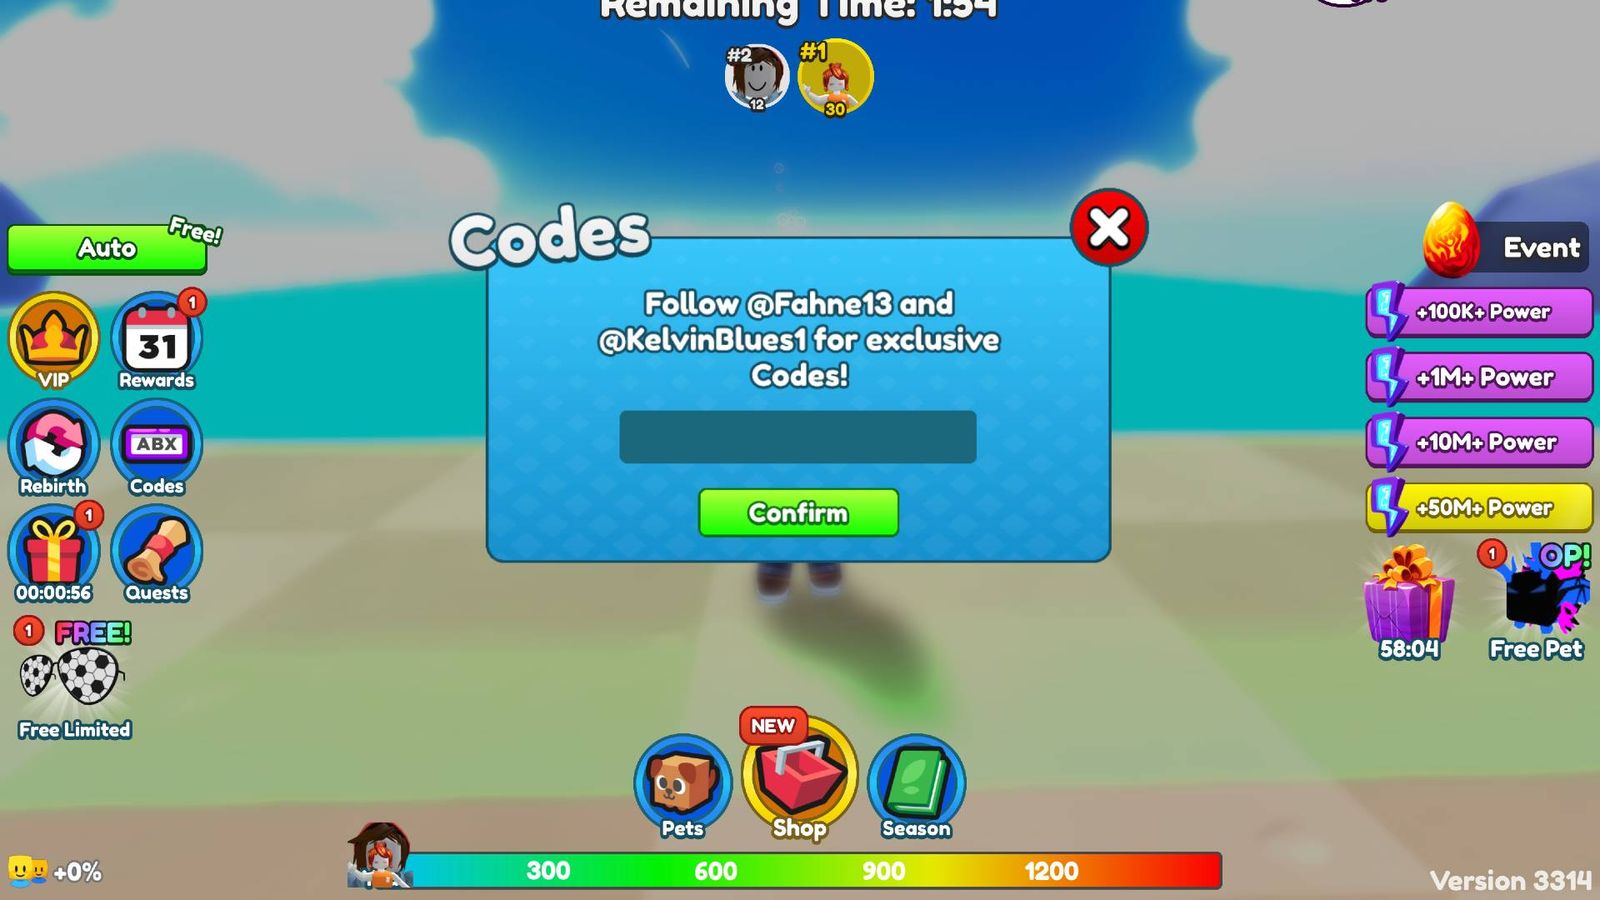 The code redemption screen in Kick It Simulator.